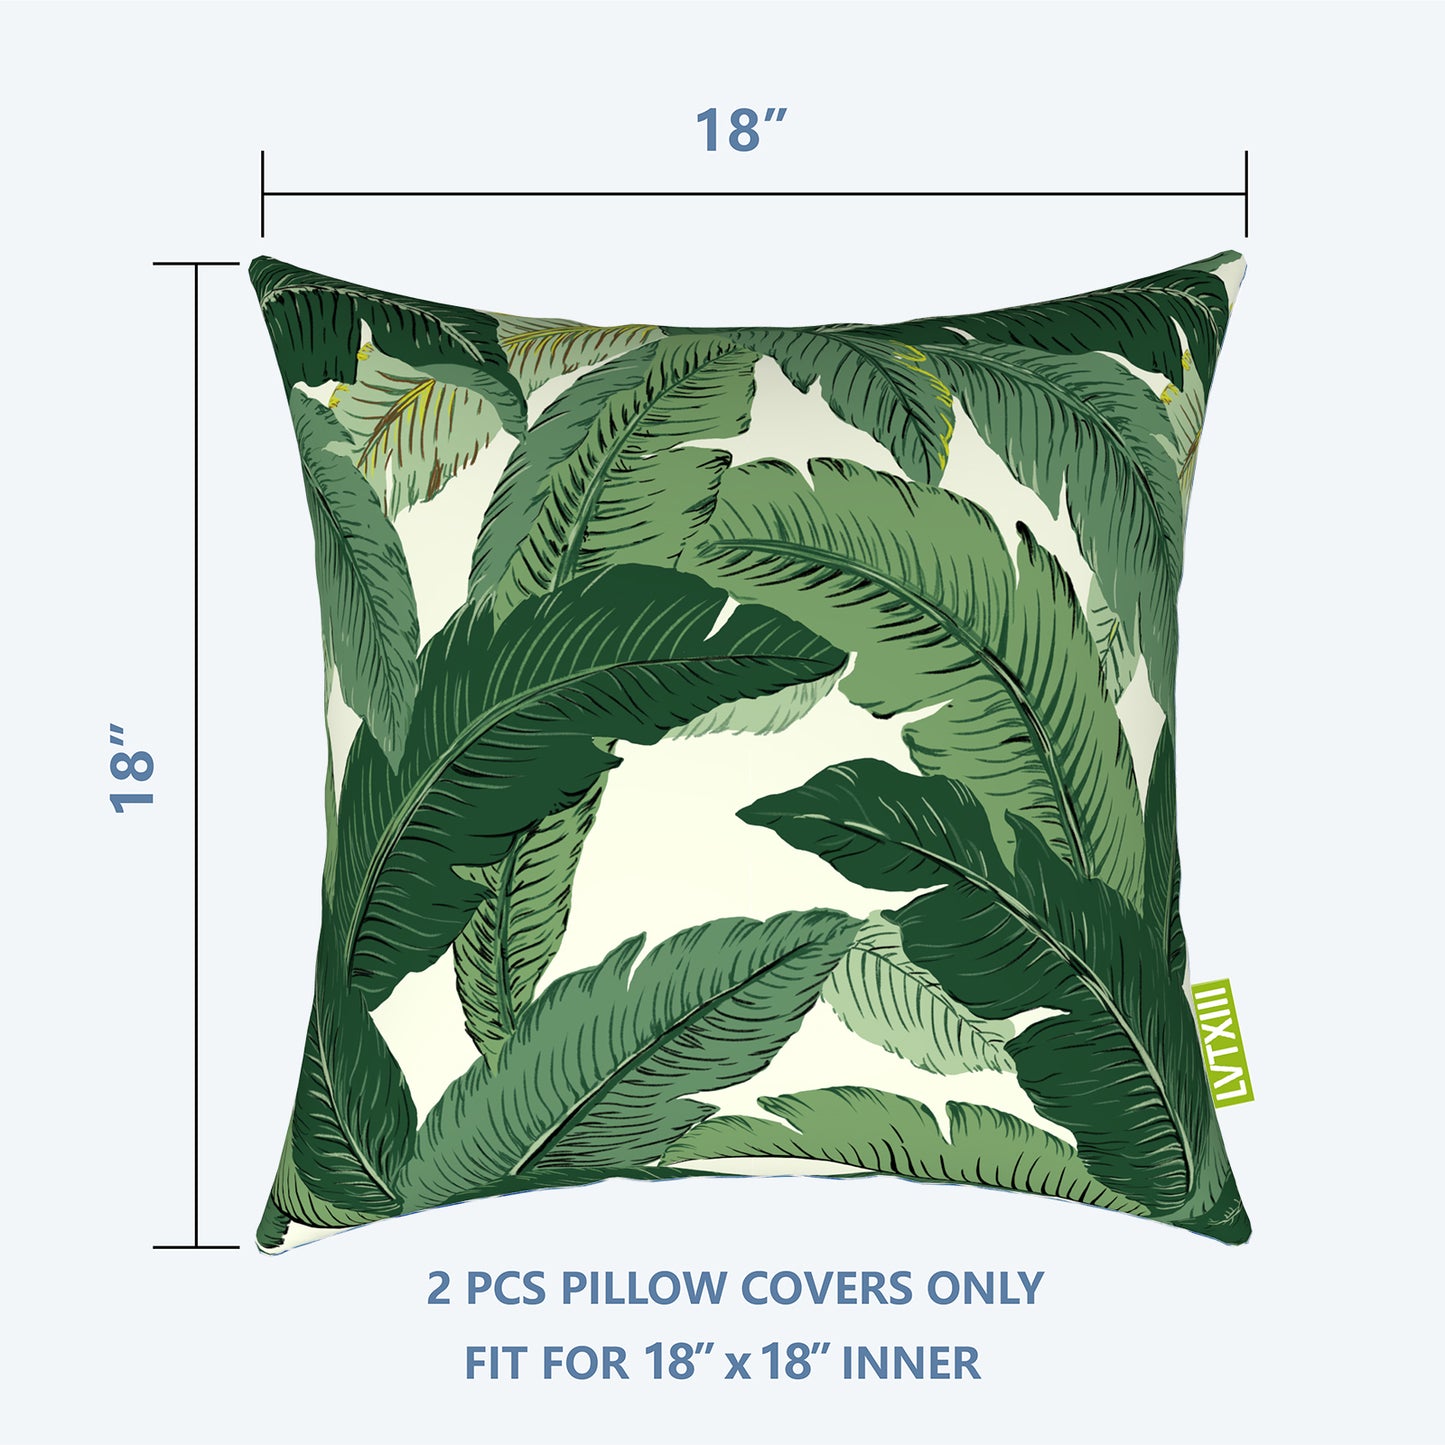 Melody Elephant Outdoor Throw Pillow Covers Pack of 2, Decorative Water Repellent Square Pillow Cases 18x18 Inch, Patio Pillowcases for Home Patio Furniture Use, Swaying Palms Green